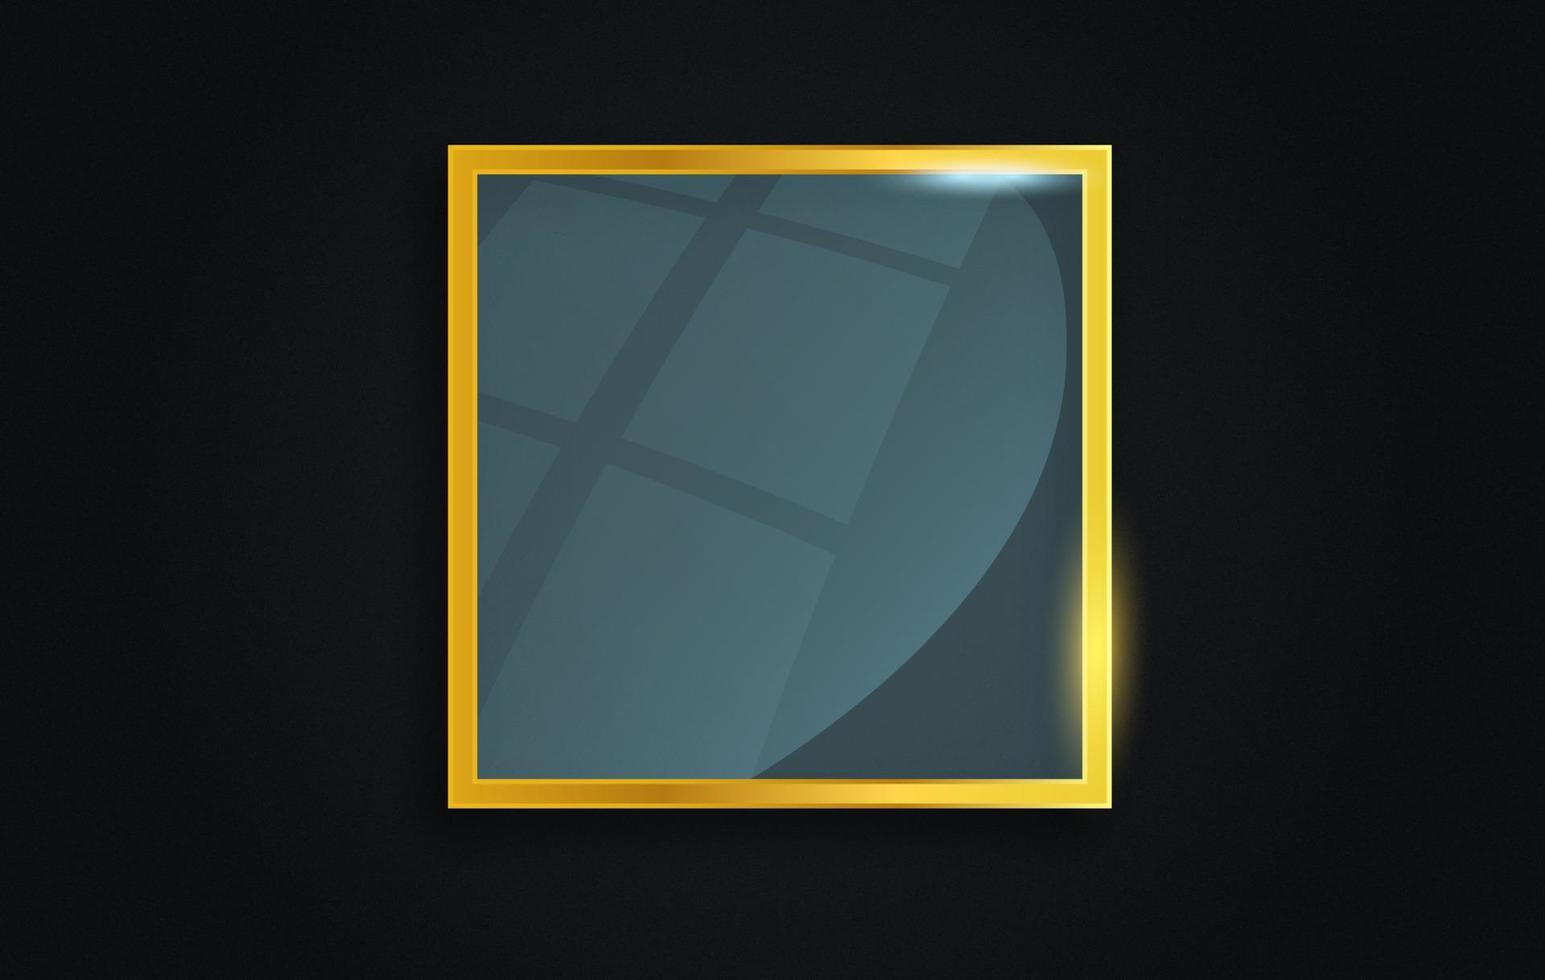 Realistic glass effect in a square golden frame. Luxury mirror mockup vector illustration.